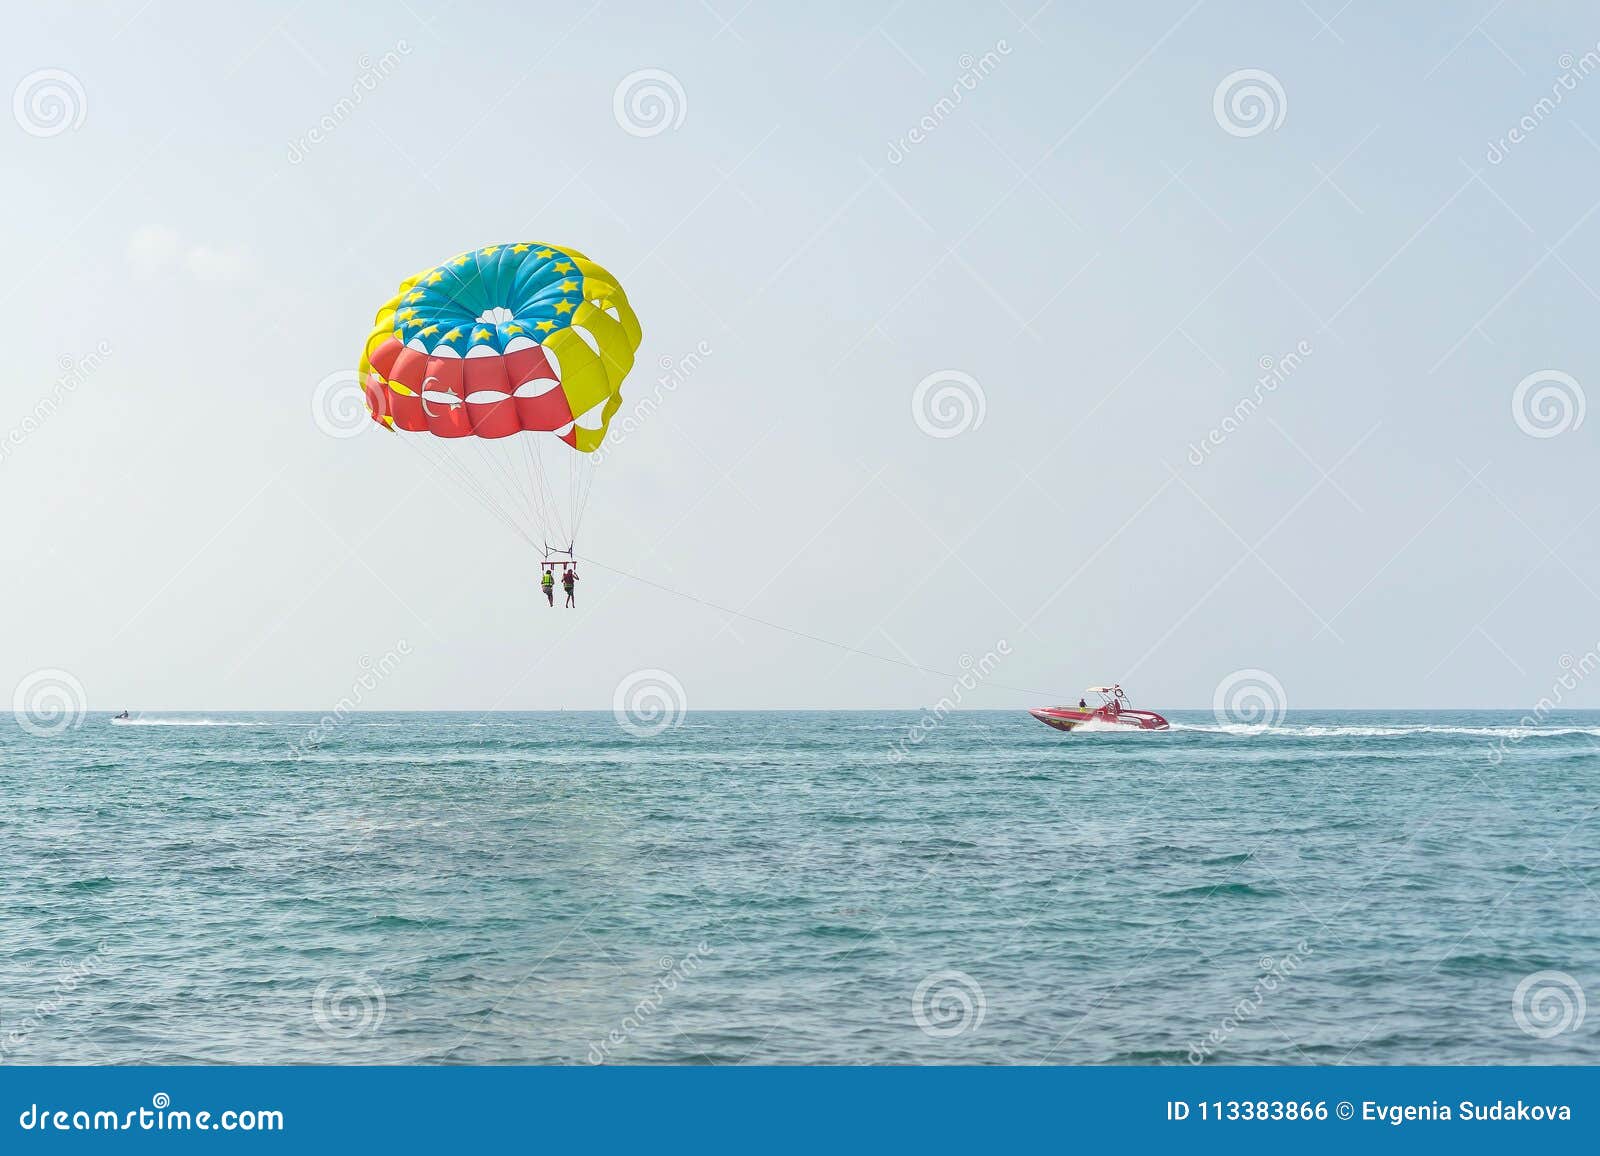 colorful parasail wing pulled by a boat in the sea water - alanya, turkey